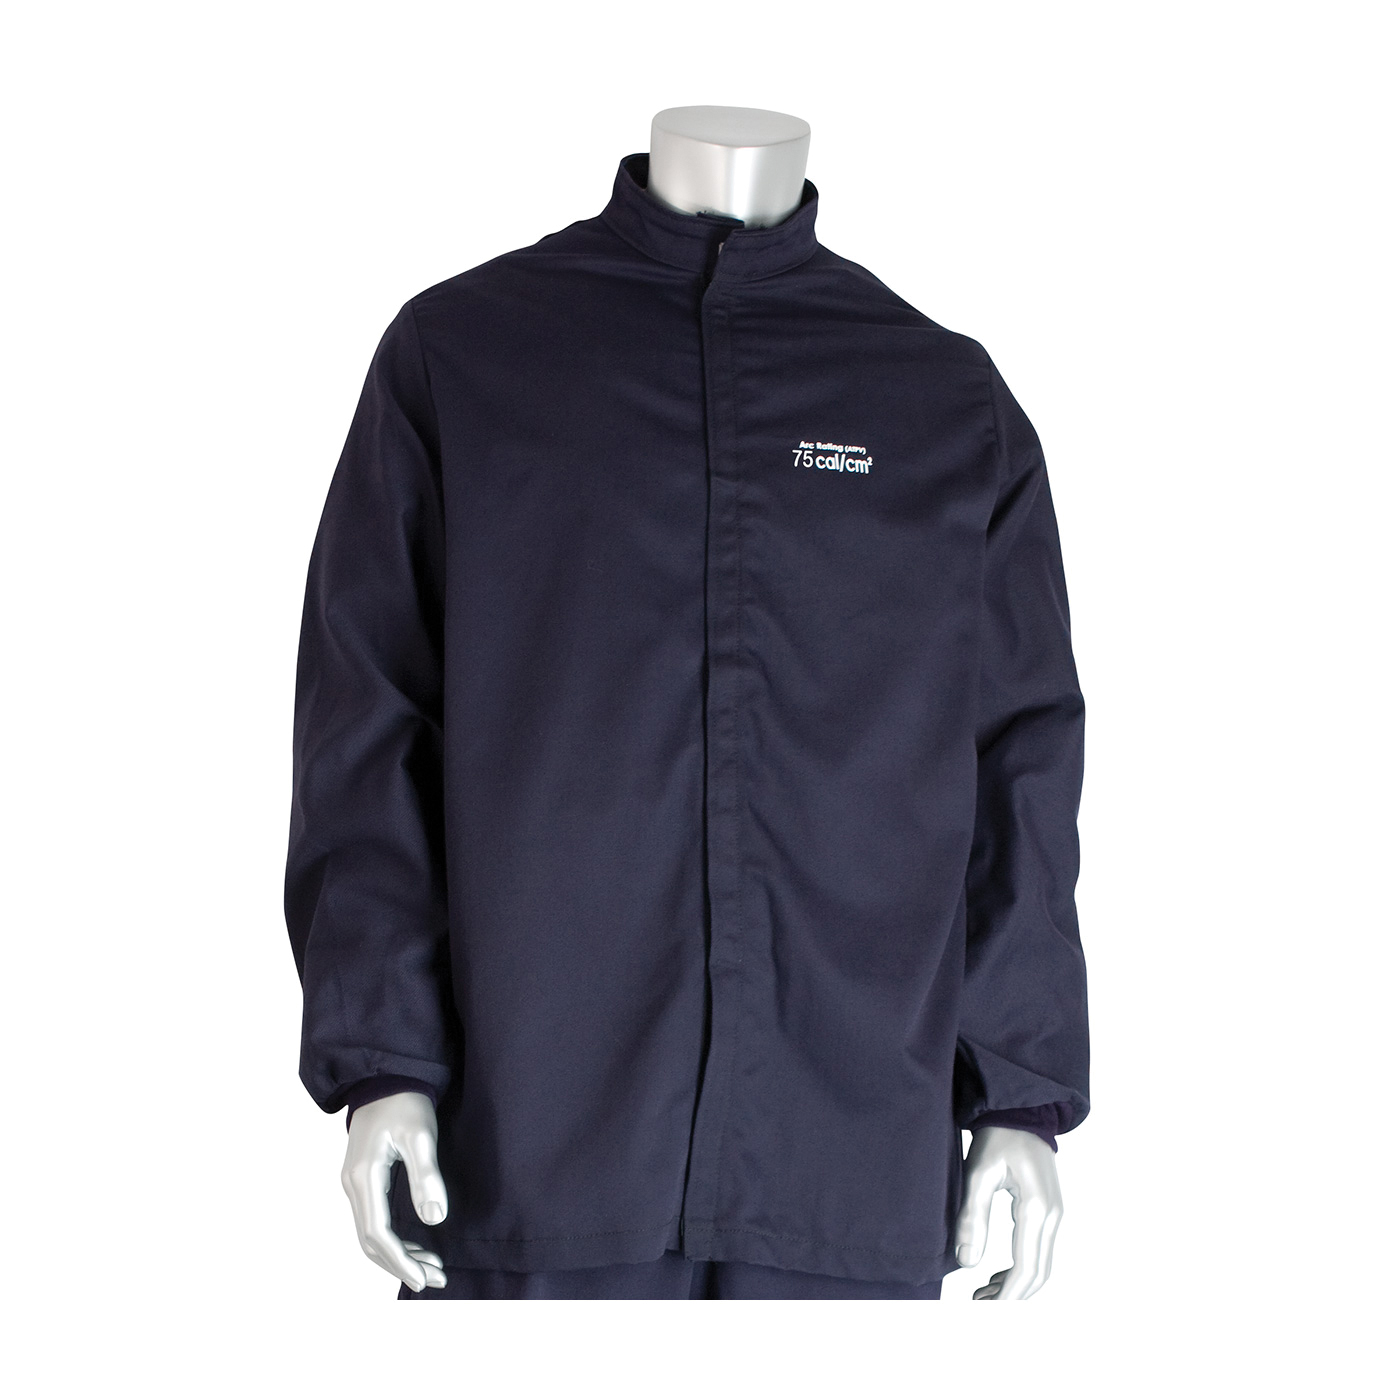 PIP® 9100-75000/L Arc and Flame Resistant Jacket, L, Navy, Westex® UltraSoft® 88% Cotton 12% High Tenacity Nylon, 44 to 46 in Chest, Resists: Arc and Flame, ASTM F1506-10a, ASTM F2178-12